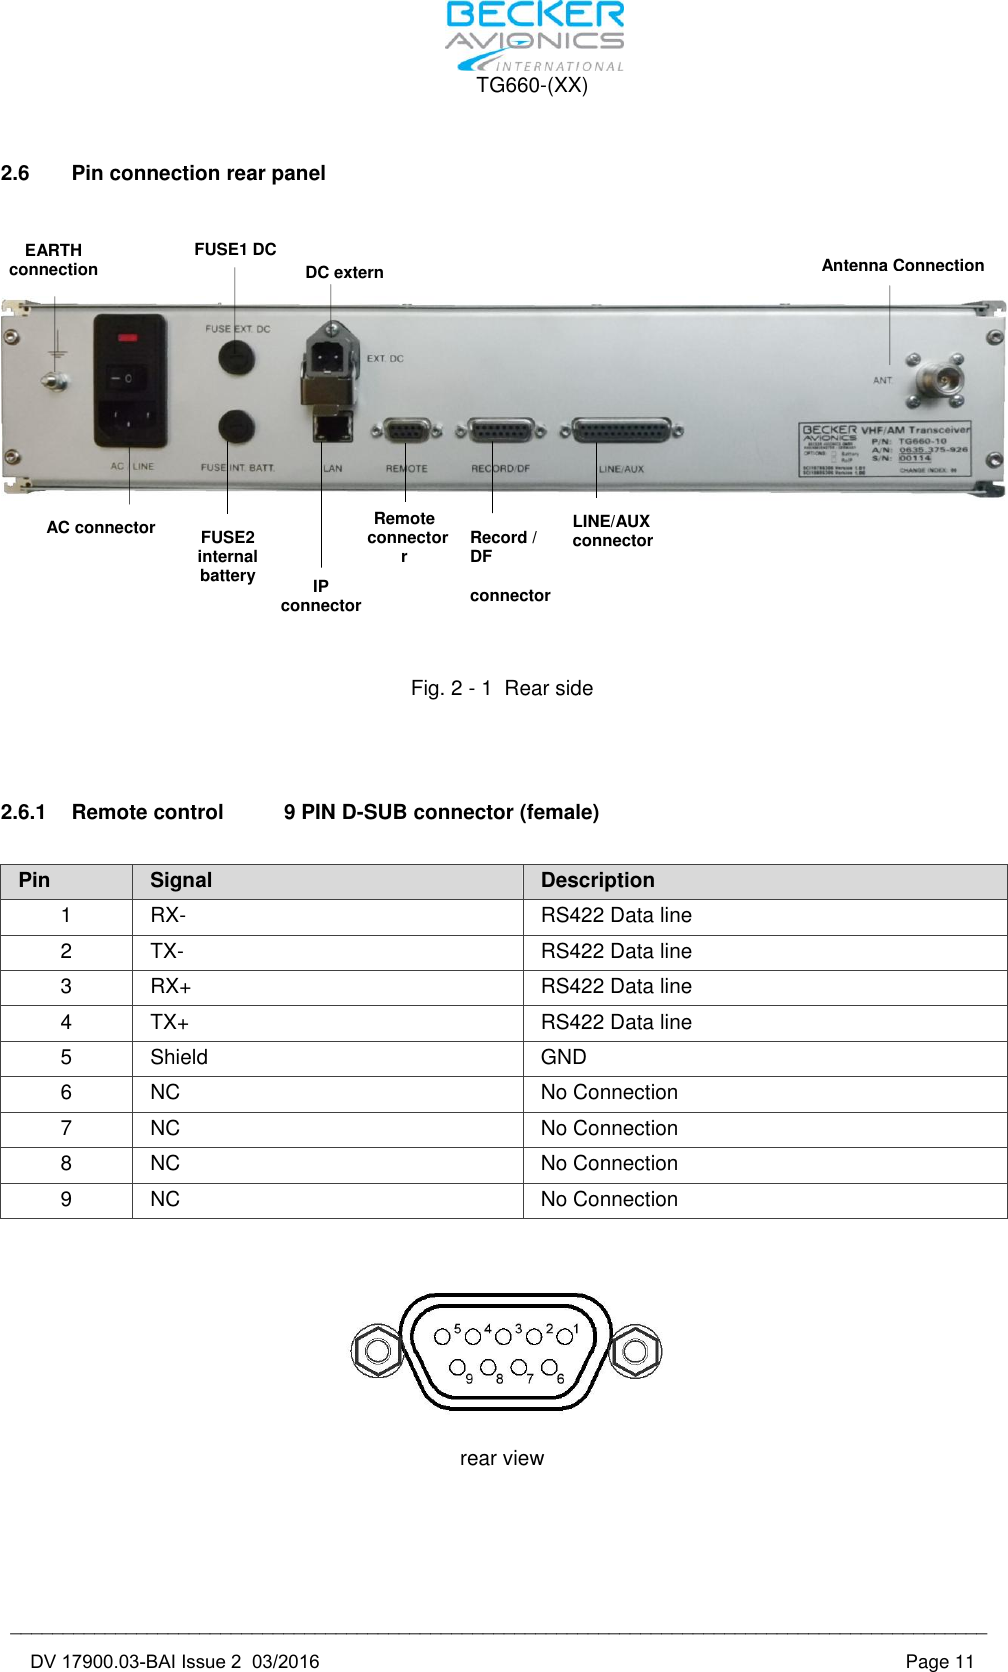 TG660-(XX) _____________________________________________________________________________________________   DV 17900.03-BAI Issue 2  03/2016 Page 11 2.6  Pin connection rear panel Fig. 2 - 1  Rear side 2.6.1  Remote control  9 PIN D-SUB connector (female) Pin Signal Description 1 RX- RS422 Data line 2 TX- RS422 Data line 3 RX+ RS422 Data line 4 TX+ RS422 Data line 5 Shield GND 6 NC No Connection 7 NC No Connection 8 NC No Connection 9 NC No Connection rear view EARTH connection FUSE1 DC DC externAntenna ConnectionAC connectorIP connector FUSE2 internal battery LINE/AUX connector Record / DFconnectorRemote connectorr